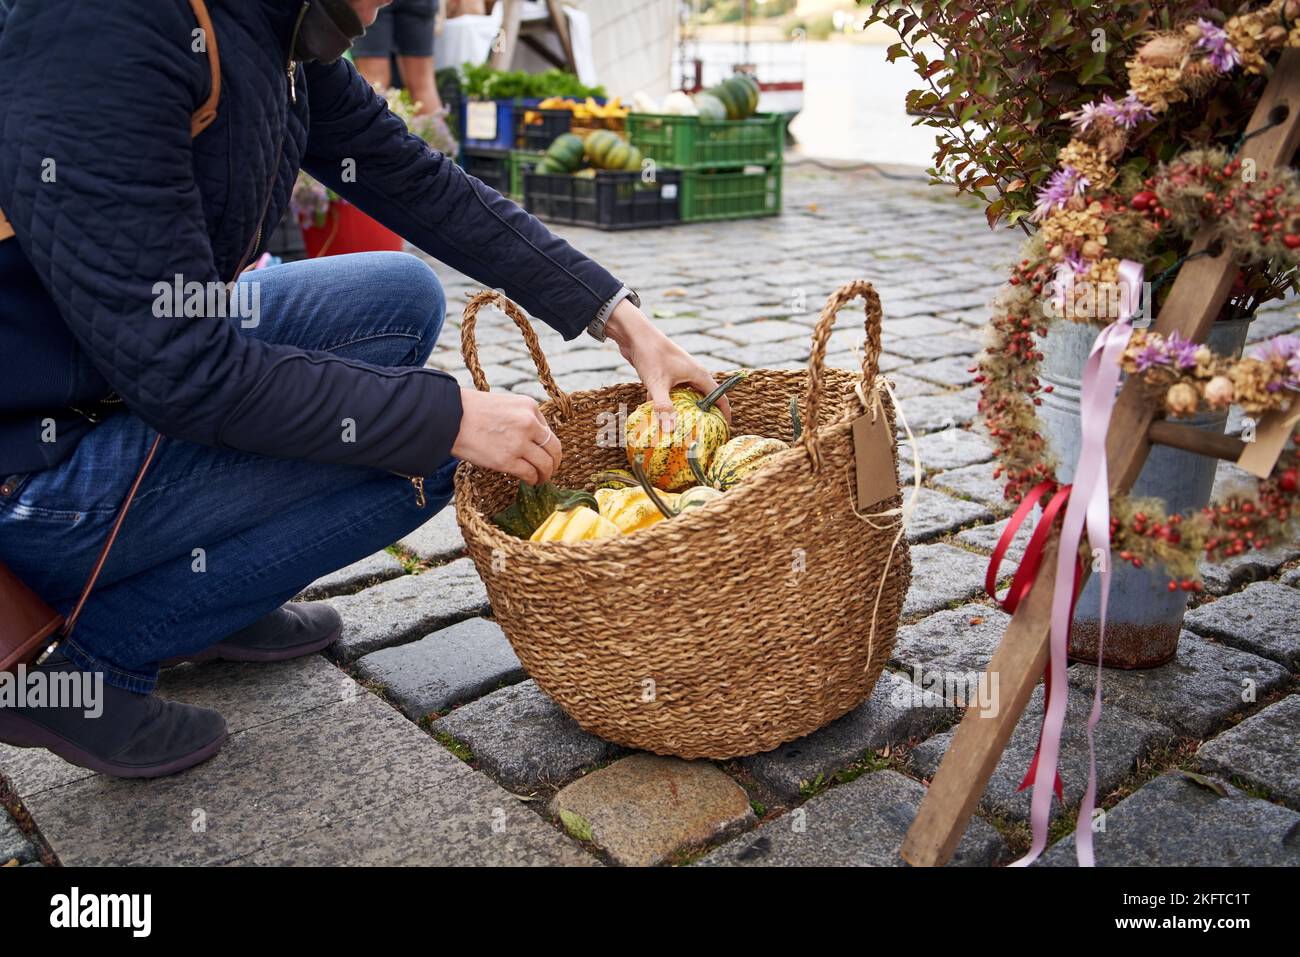 Woman selecting gourds or pumpkins in a basket at the farmers market in autumn Stock Photo